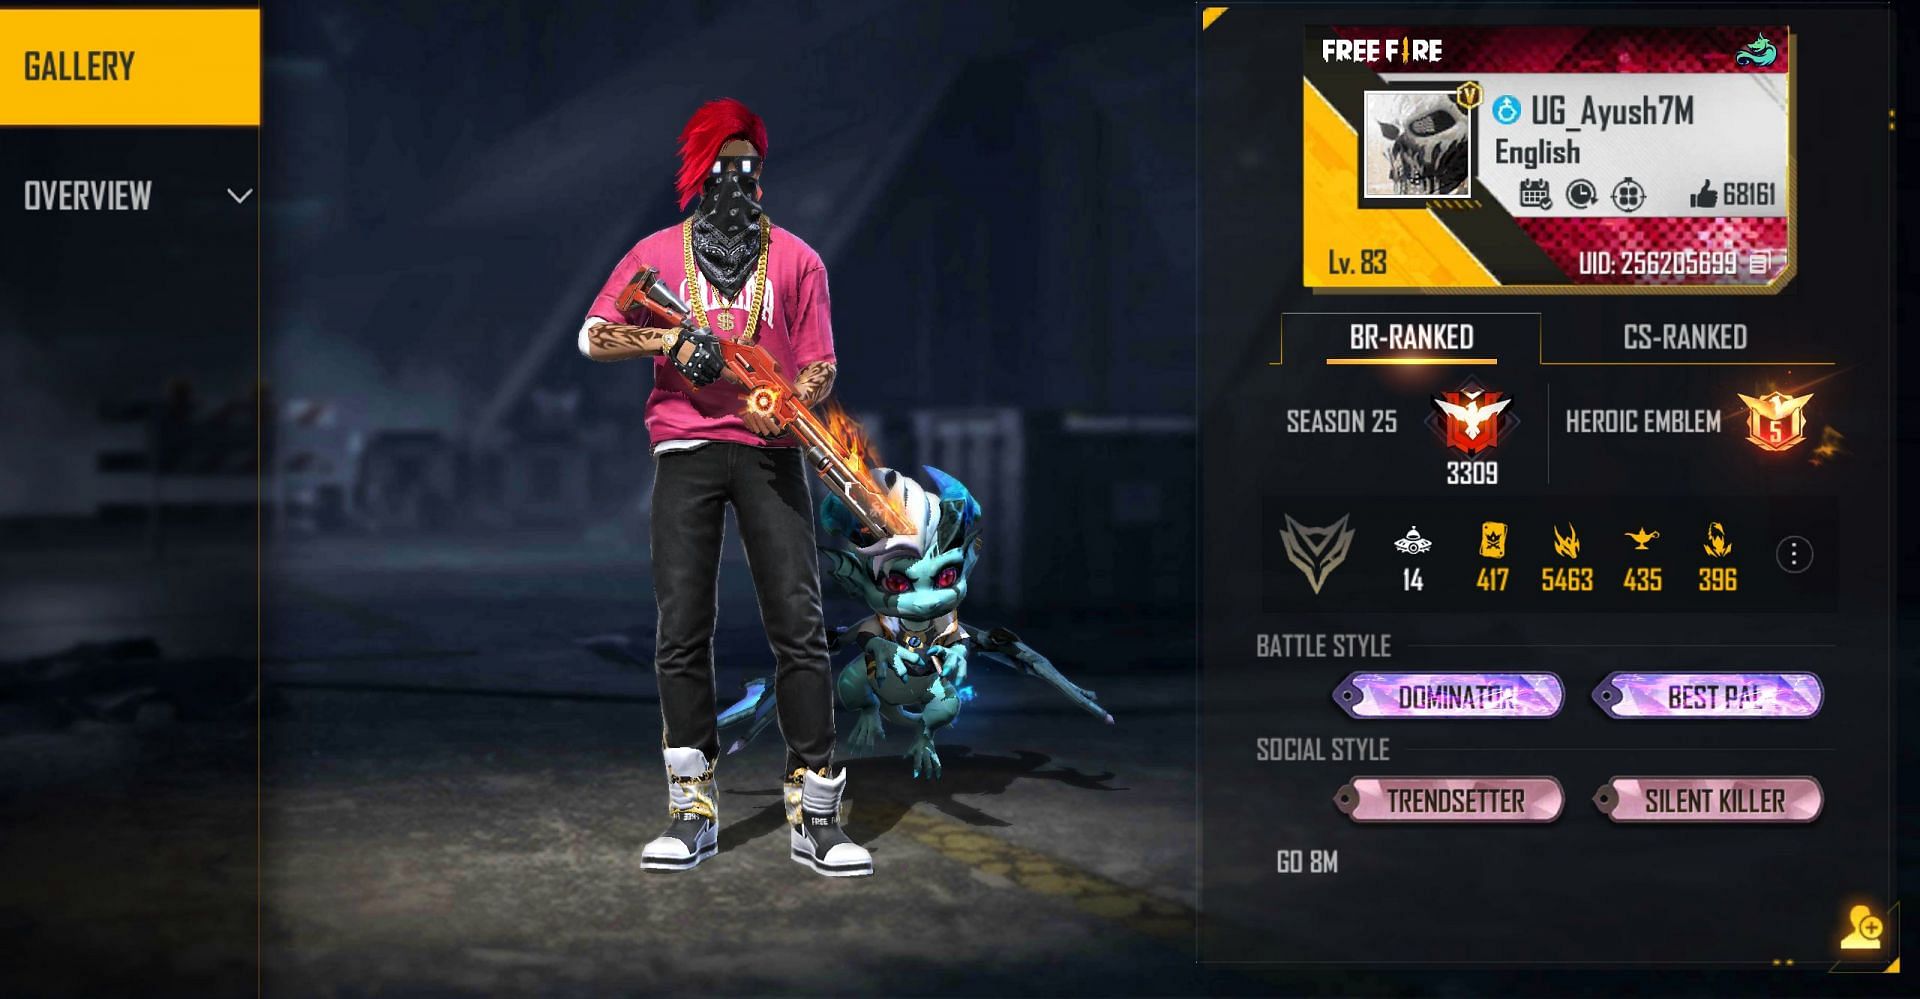 This is Ungraduate Gamer&rsquo;s ID in Free Fire (Image via Free Fire)